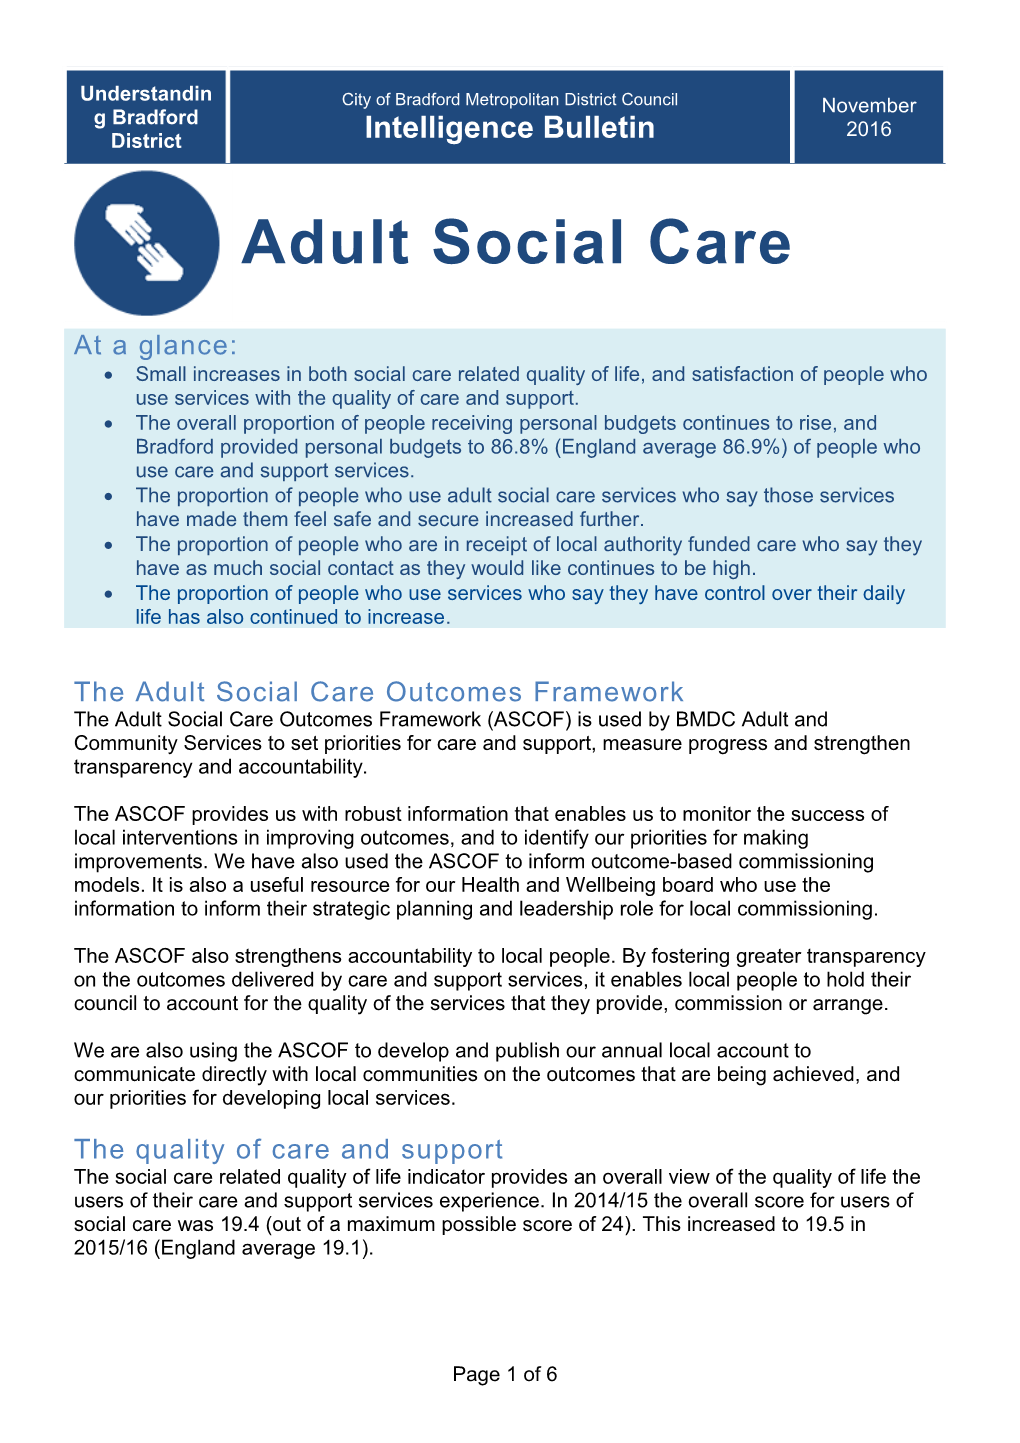 The Adult Social Care Outcomes Framework